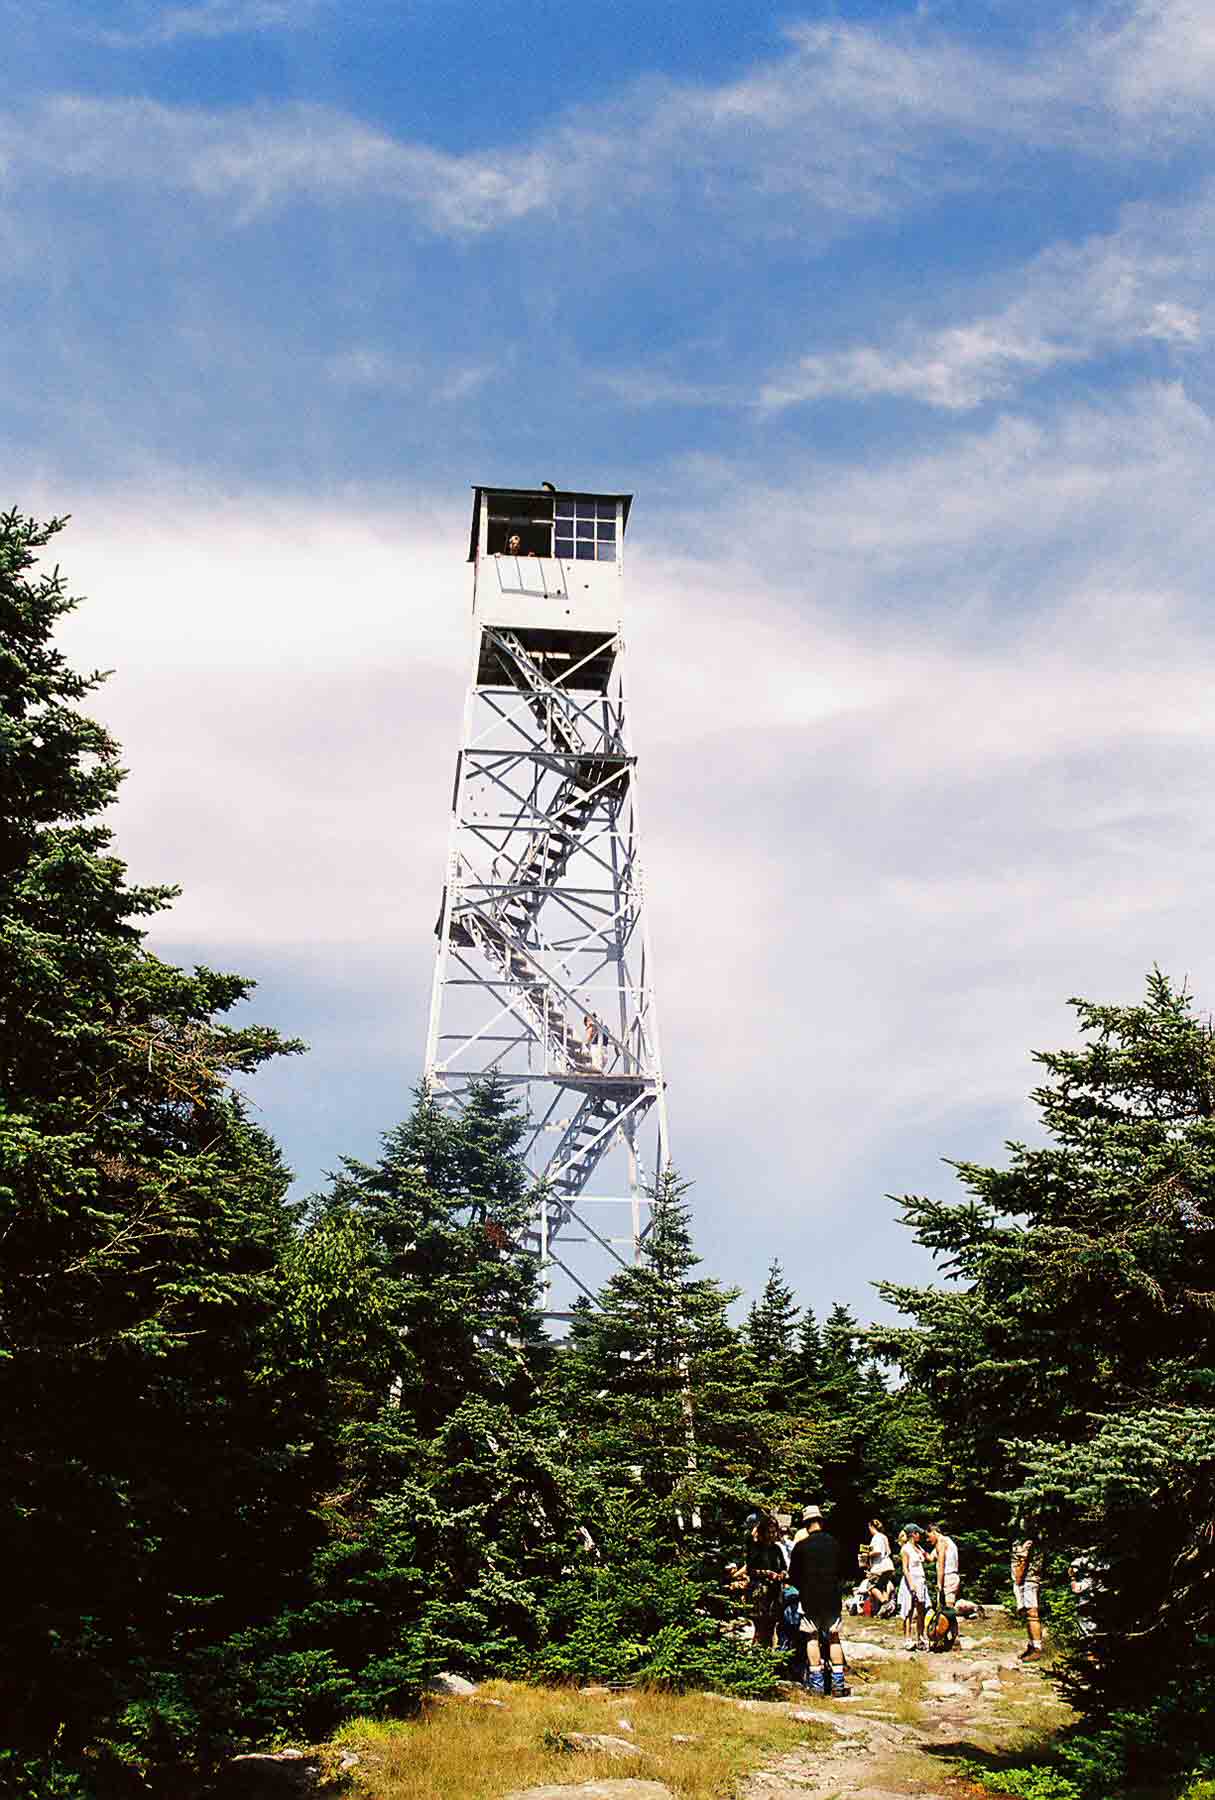 mm 13.7 - Firetower on summit of south peak of Stratton Mt. This firetower may be climbed. There are spectacular views available from the tower. Courtesy dlcul@conncoll.edu